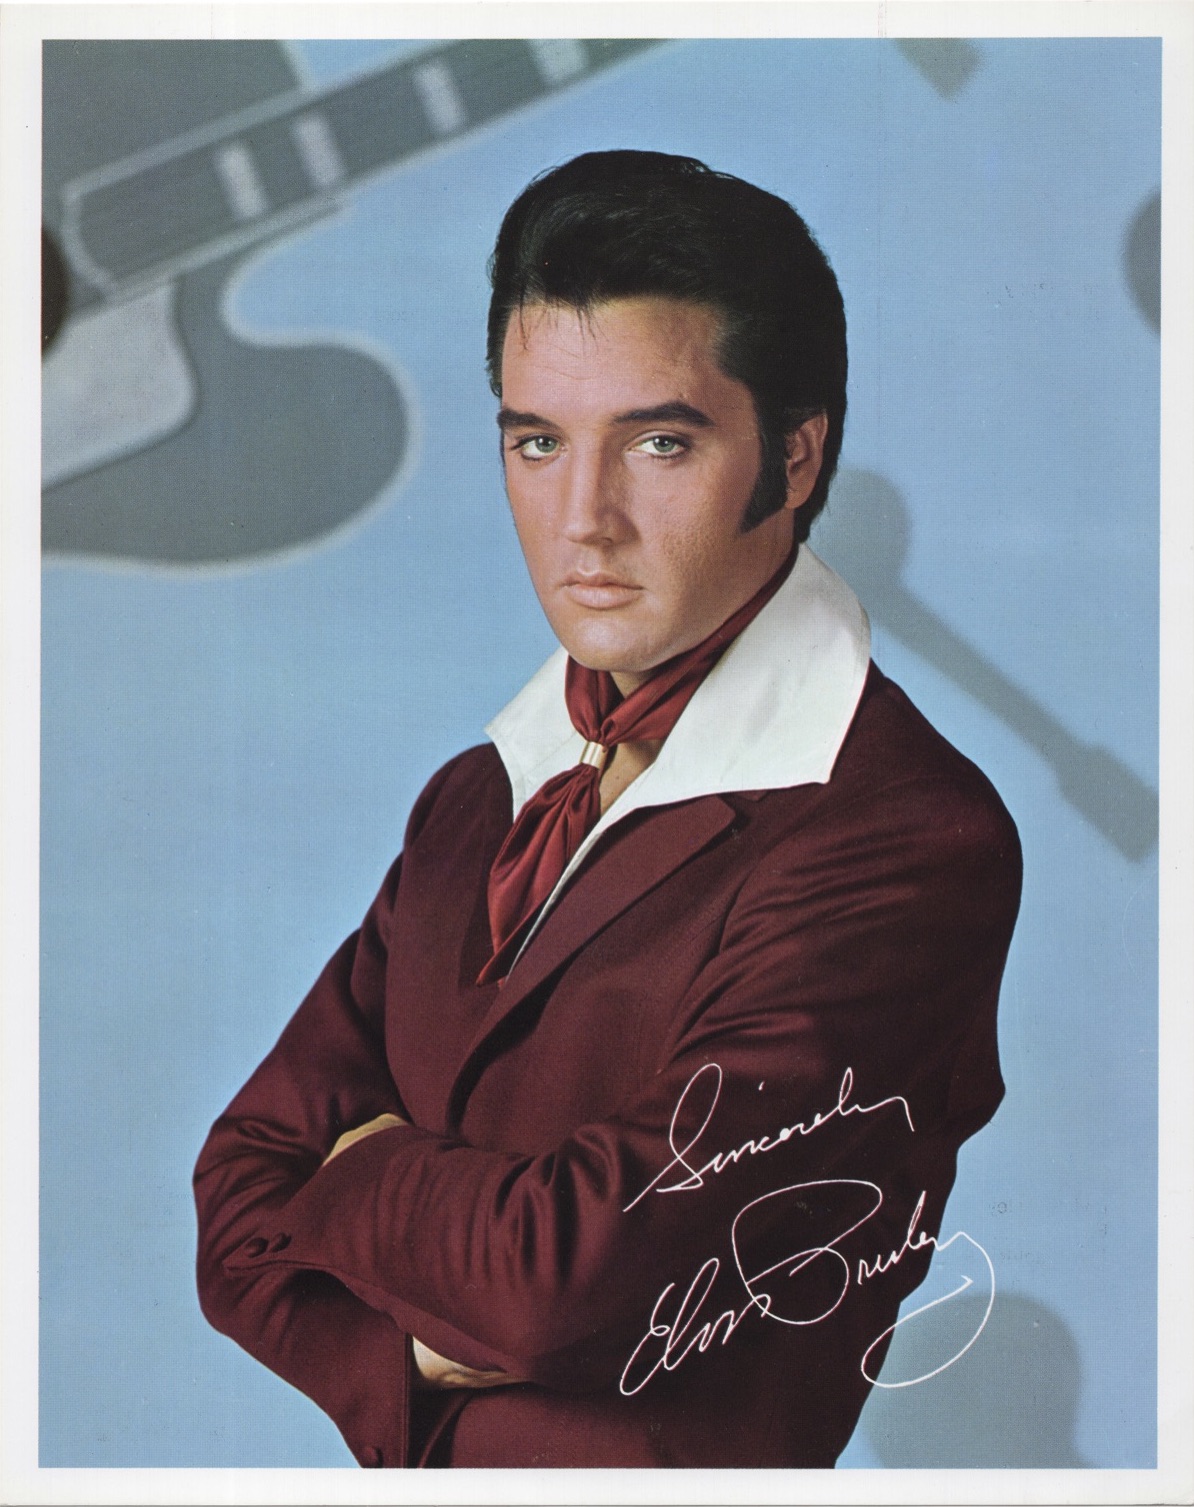 ’68 Singer Presents Elvis Singing Flaming Star and Others